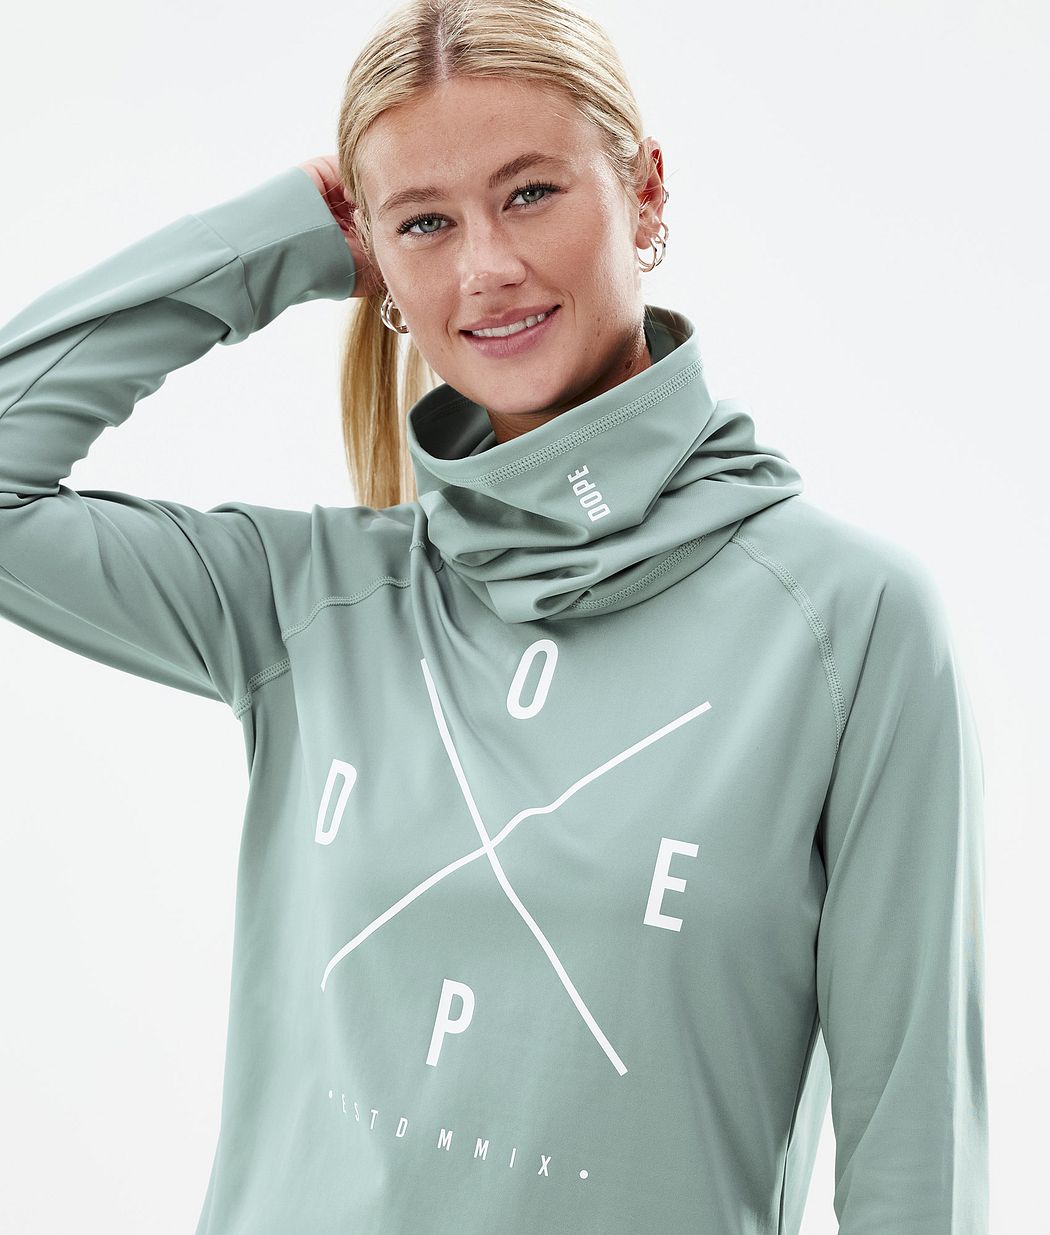 Snuggle W Base Layer Top Women 2X-Up Faded Green